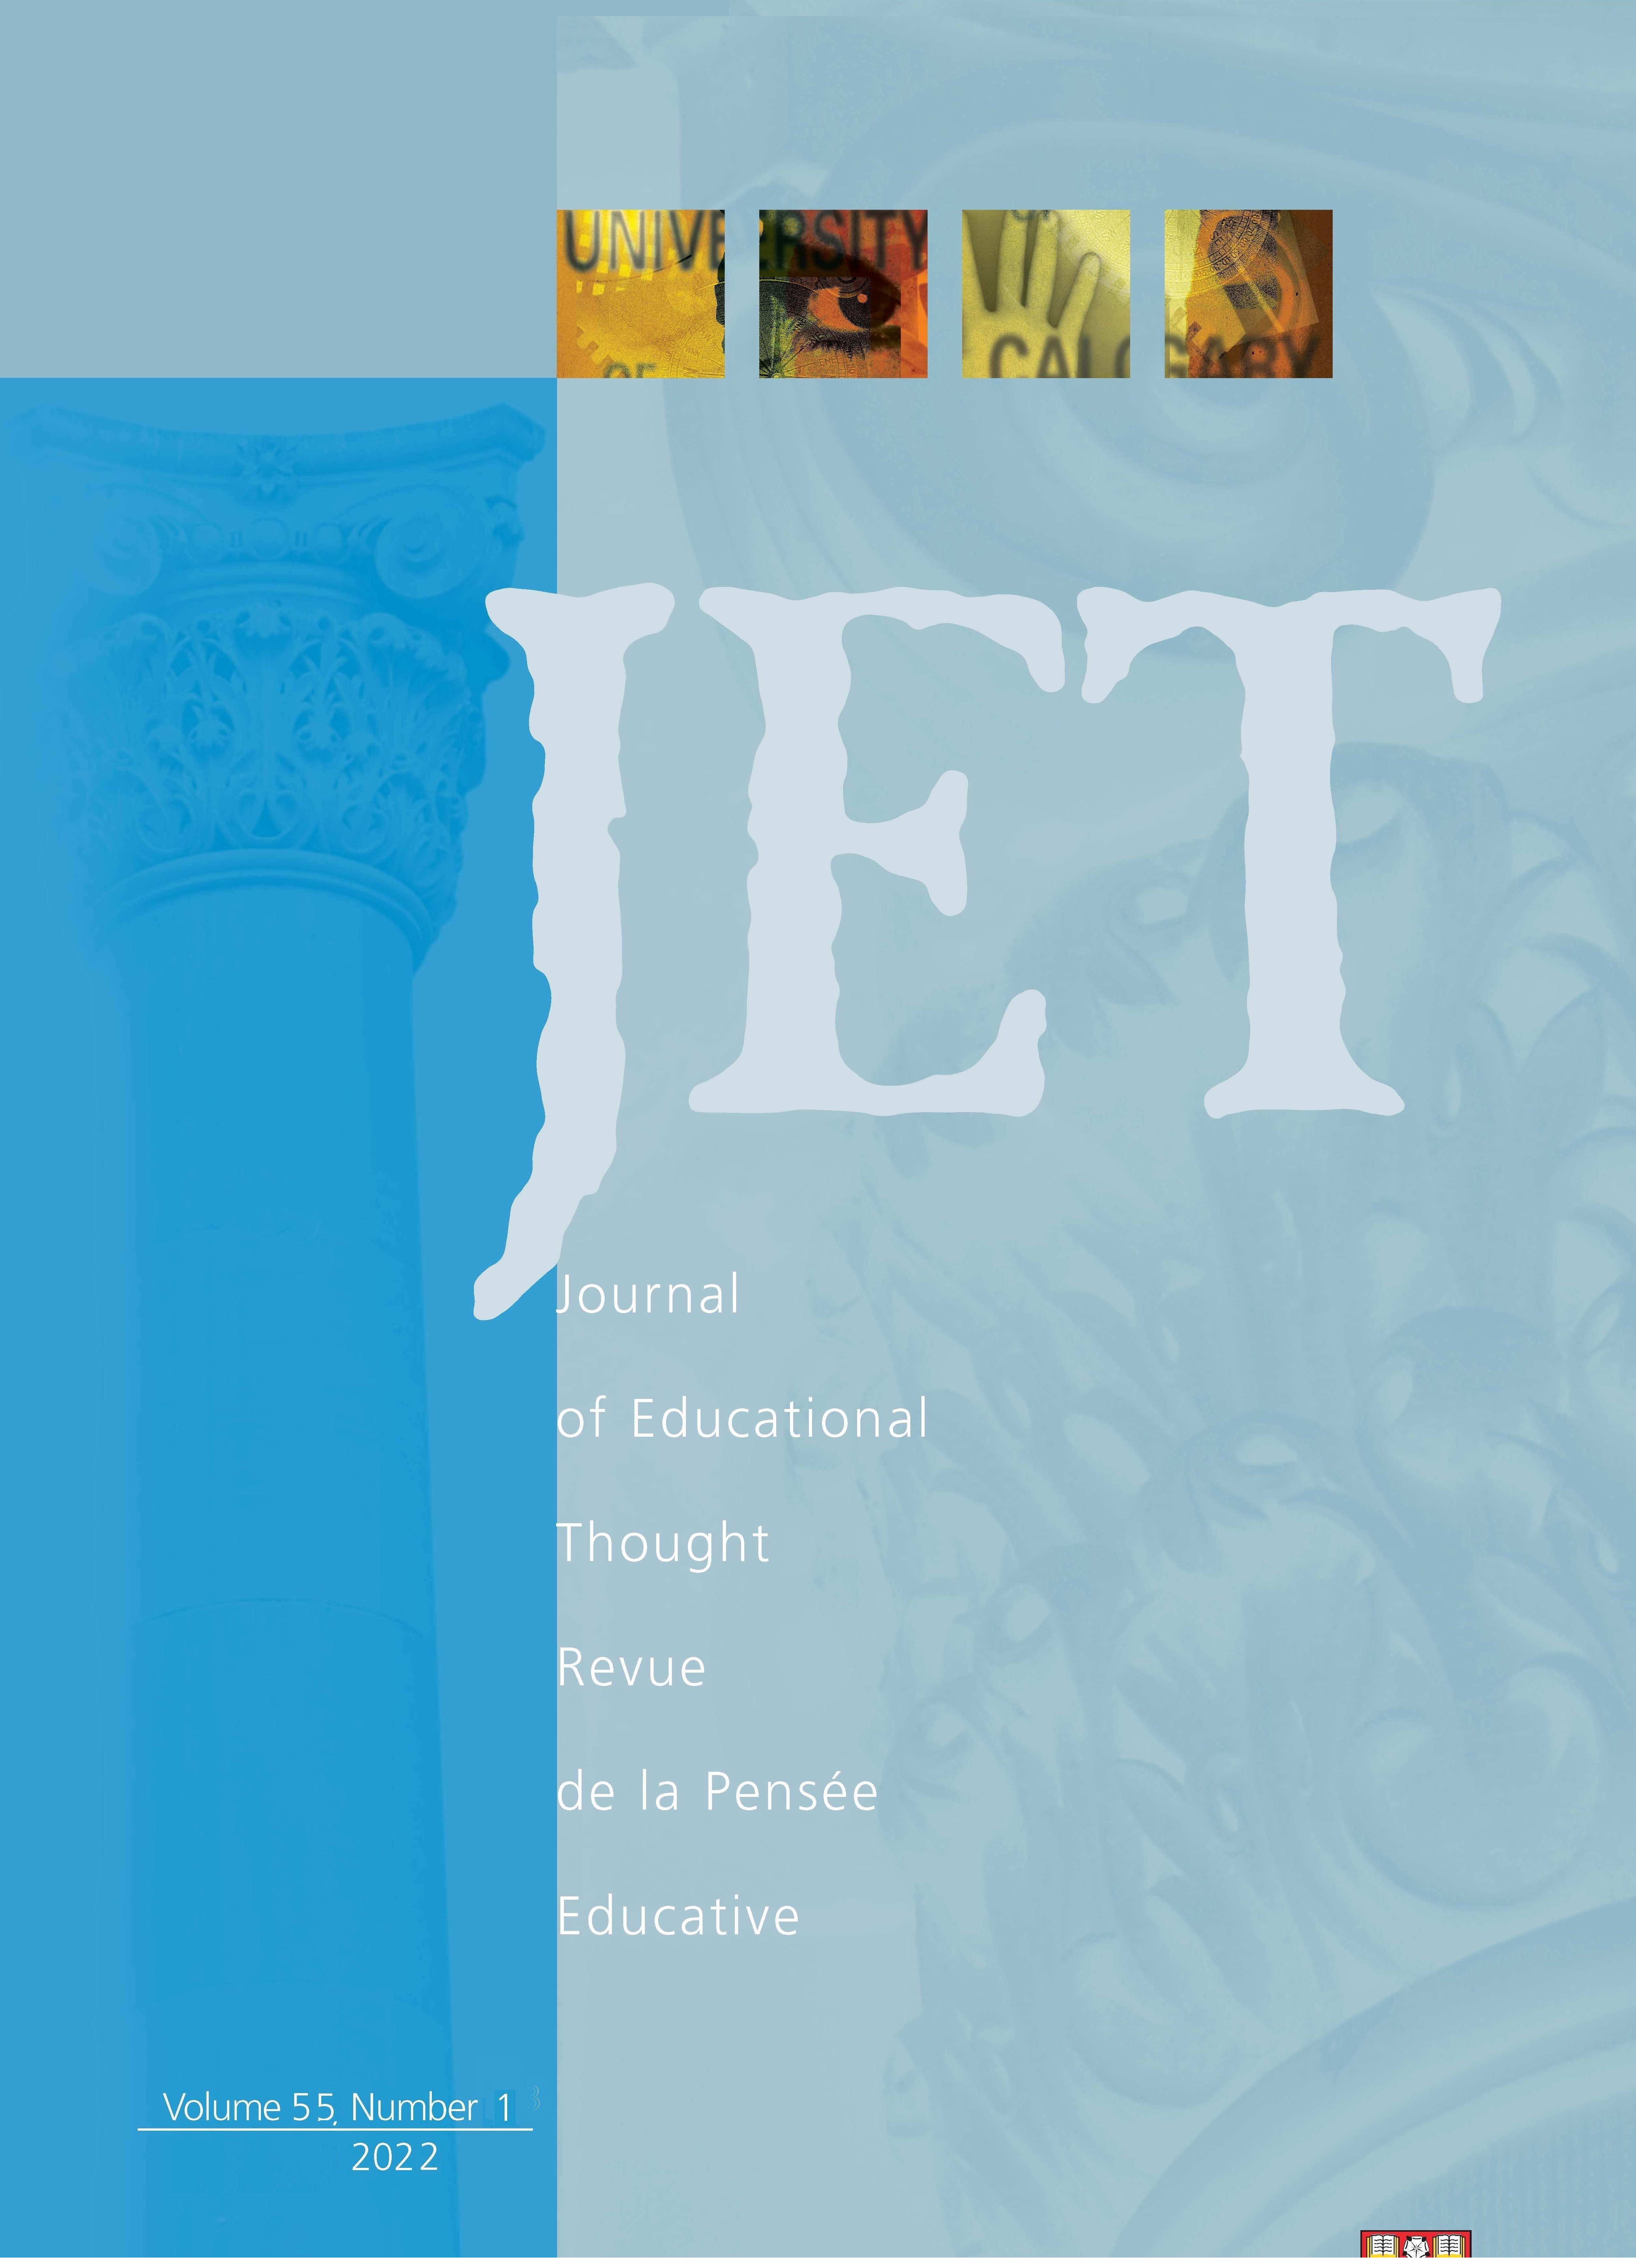 					View Vol. 55 No. 1 (2022): Journal of Educational Thought
				